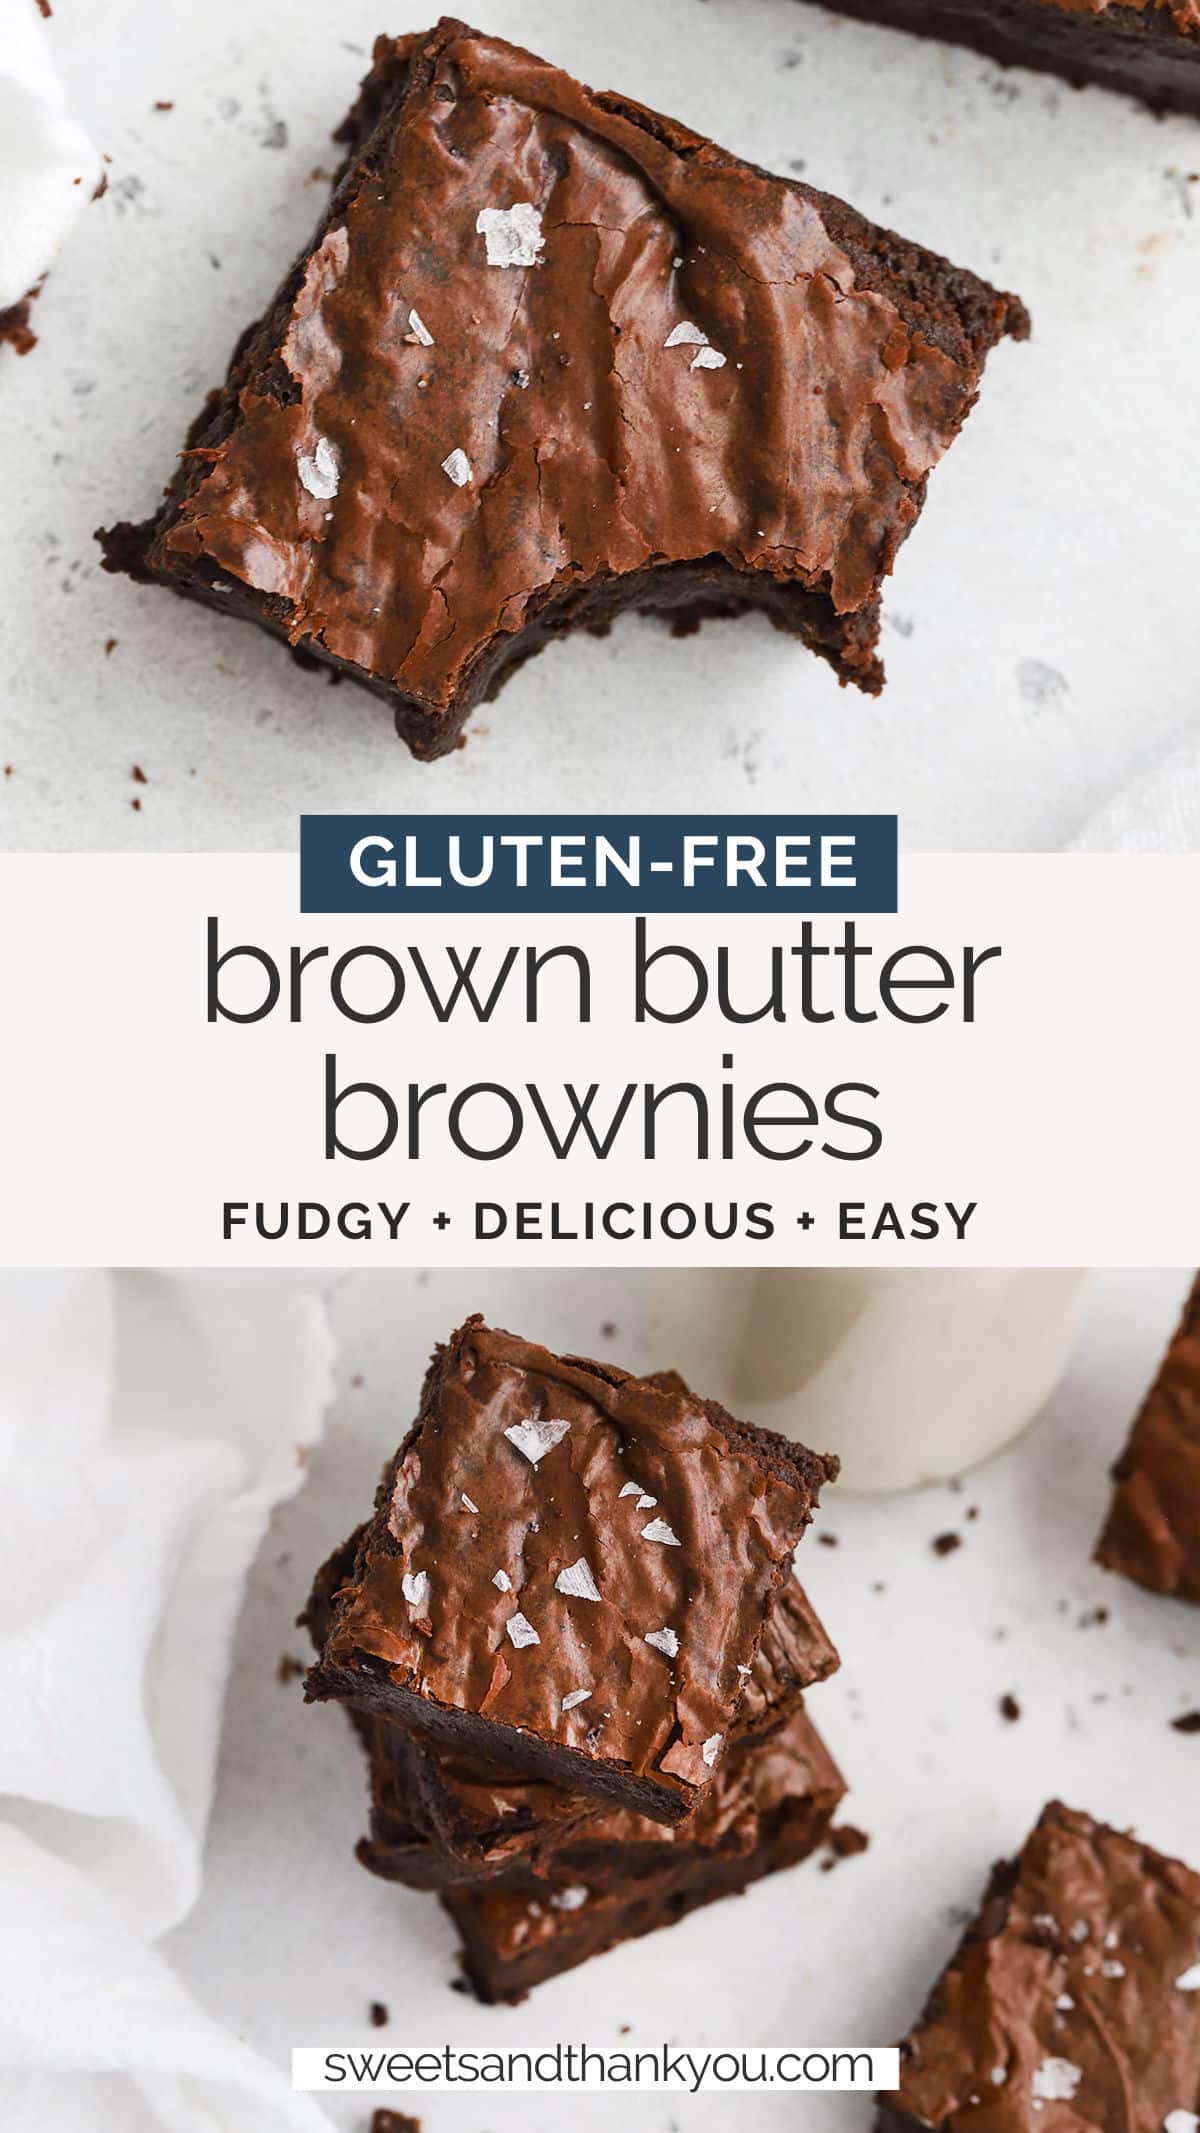 Gluten-Free Brown Butter Brownies - Fudgy gluten-free brownies that are perfect for a cozy day or chocolate craving. // Brown Butter Brownie Recipe // Gluten Free Brownies // Gluten-Free Baking // Easy gluten-free brownies // gluten free brownie recipe // gluten-free brownies with crackly tops / fudgy gluten-free brownies / chewy gluten-free brownies 